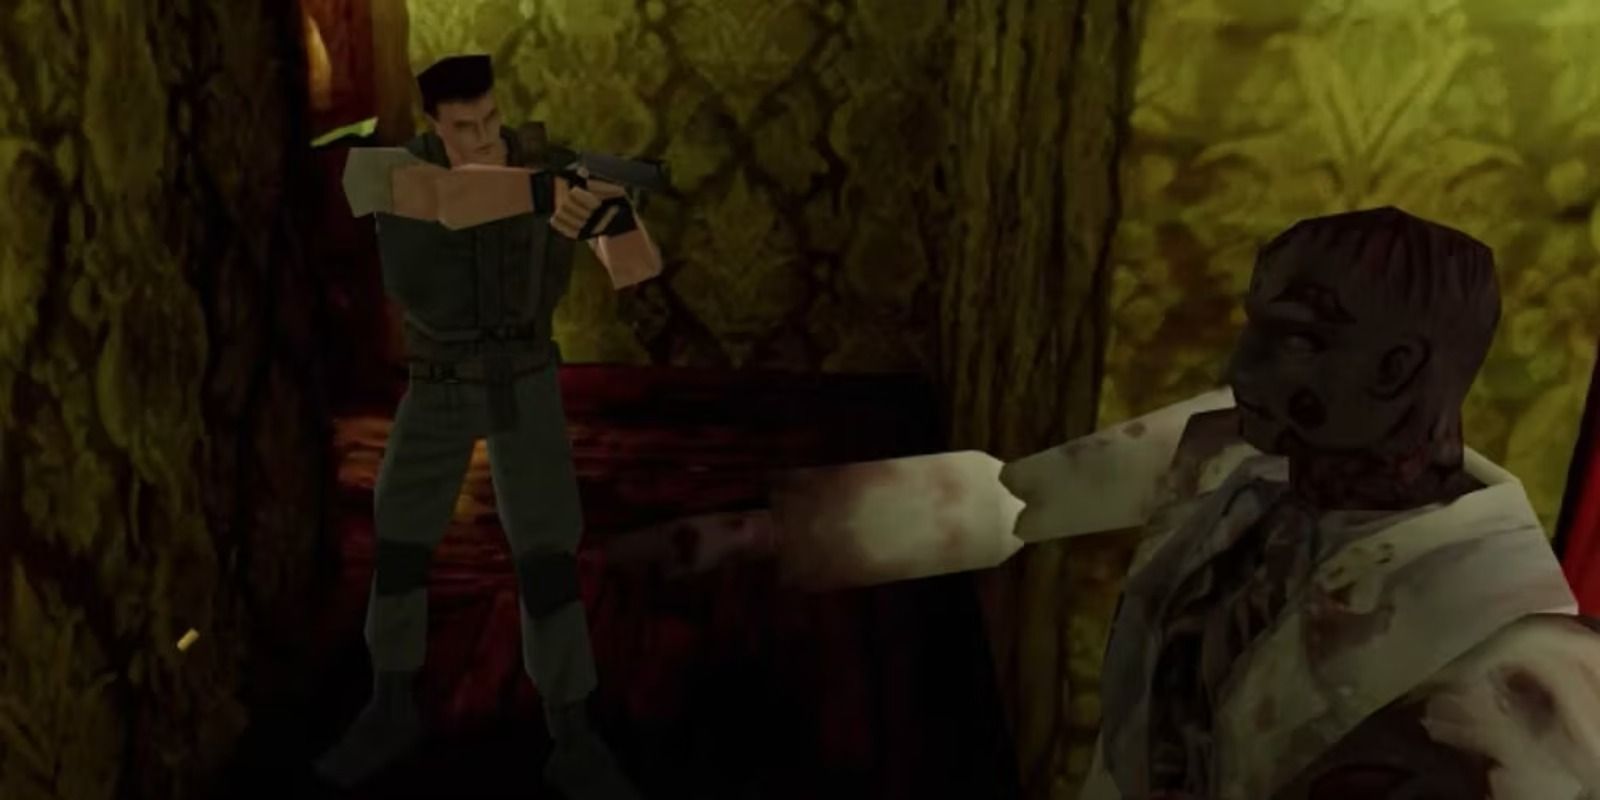 Chris Redfield shoots a zombie in Resident Evil 